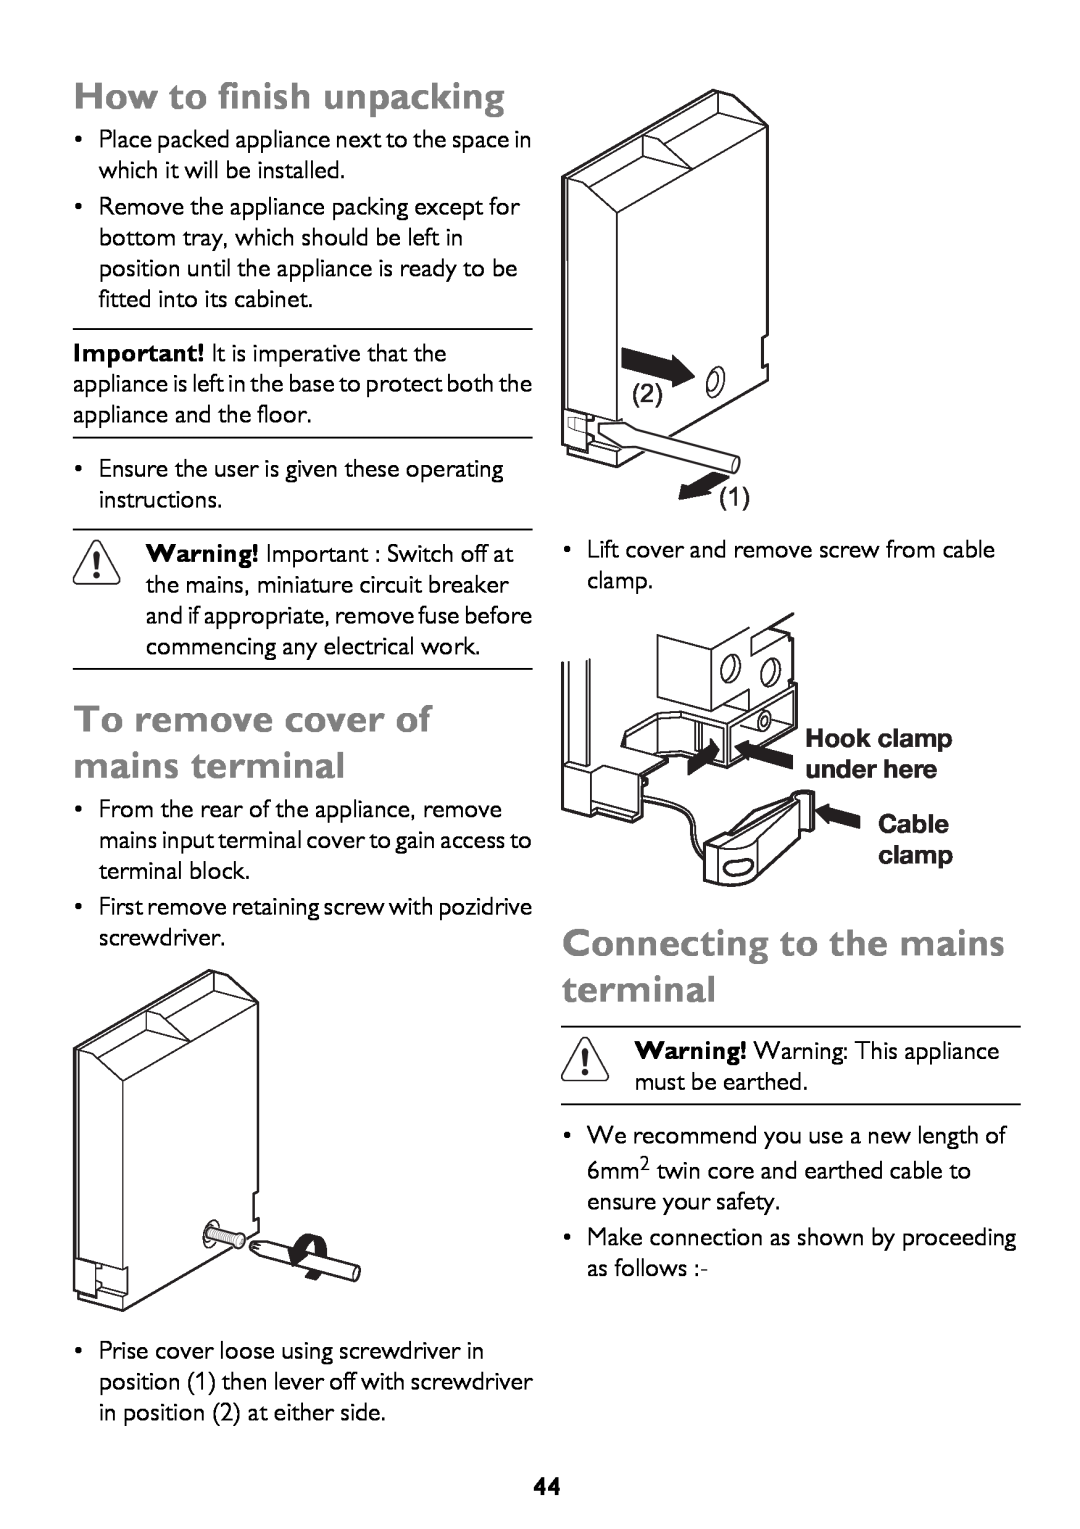 John Lewis JLBIDO911 How to finish unpacking, To remove cover of mains terminal, Connecting to the mains terminal 